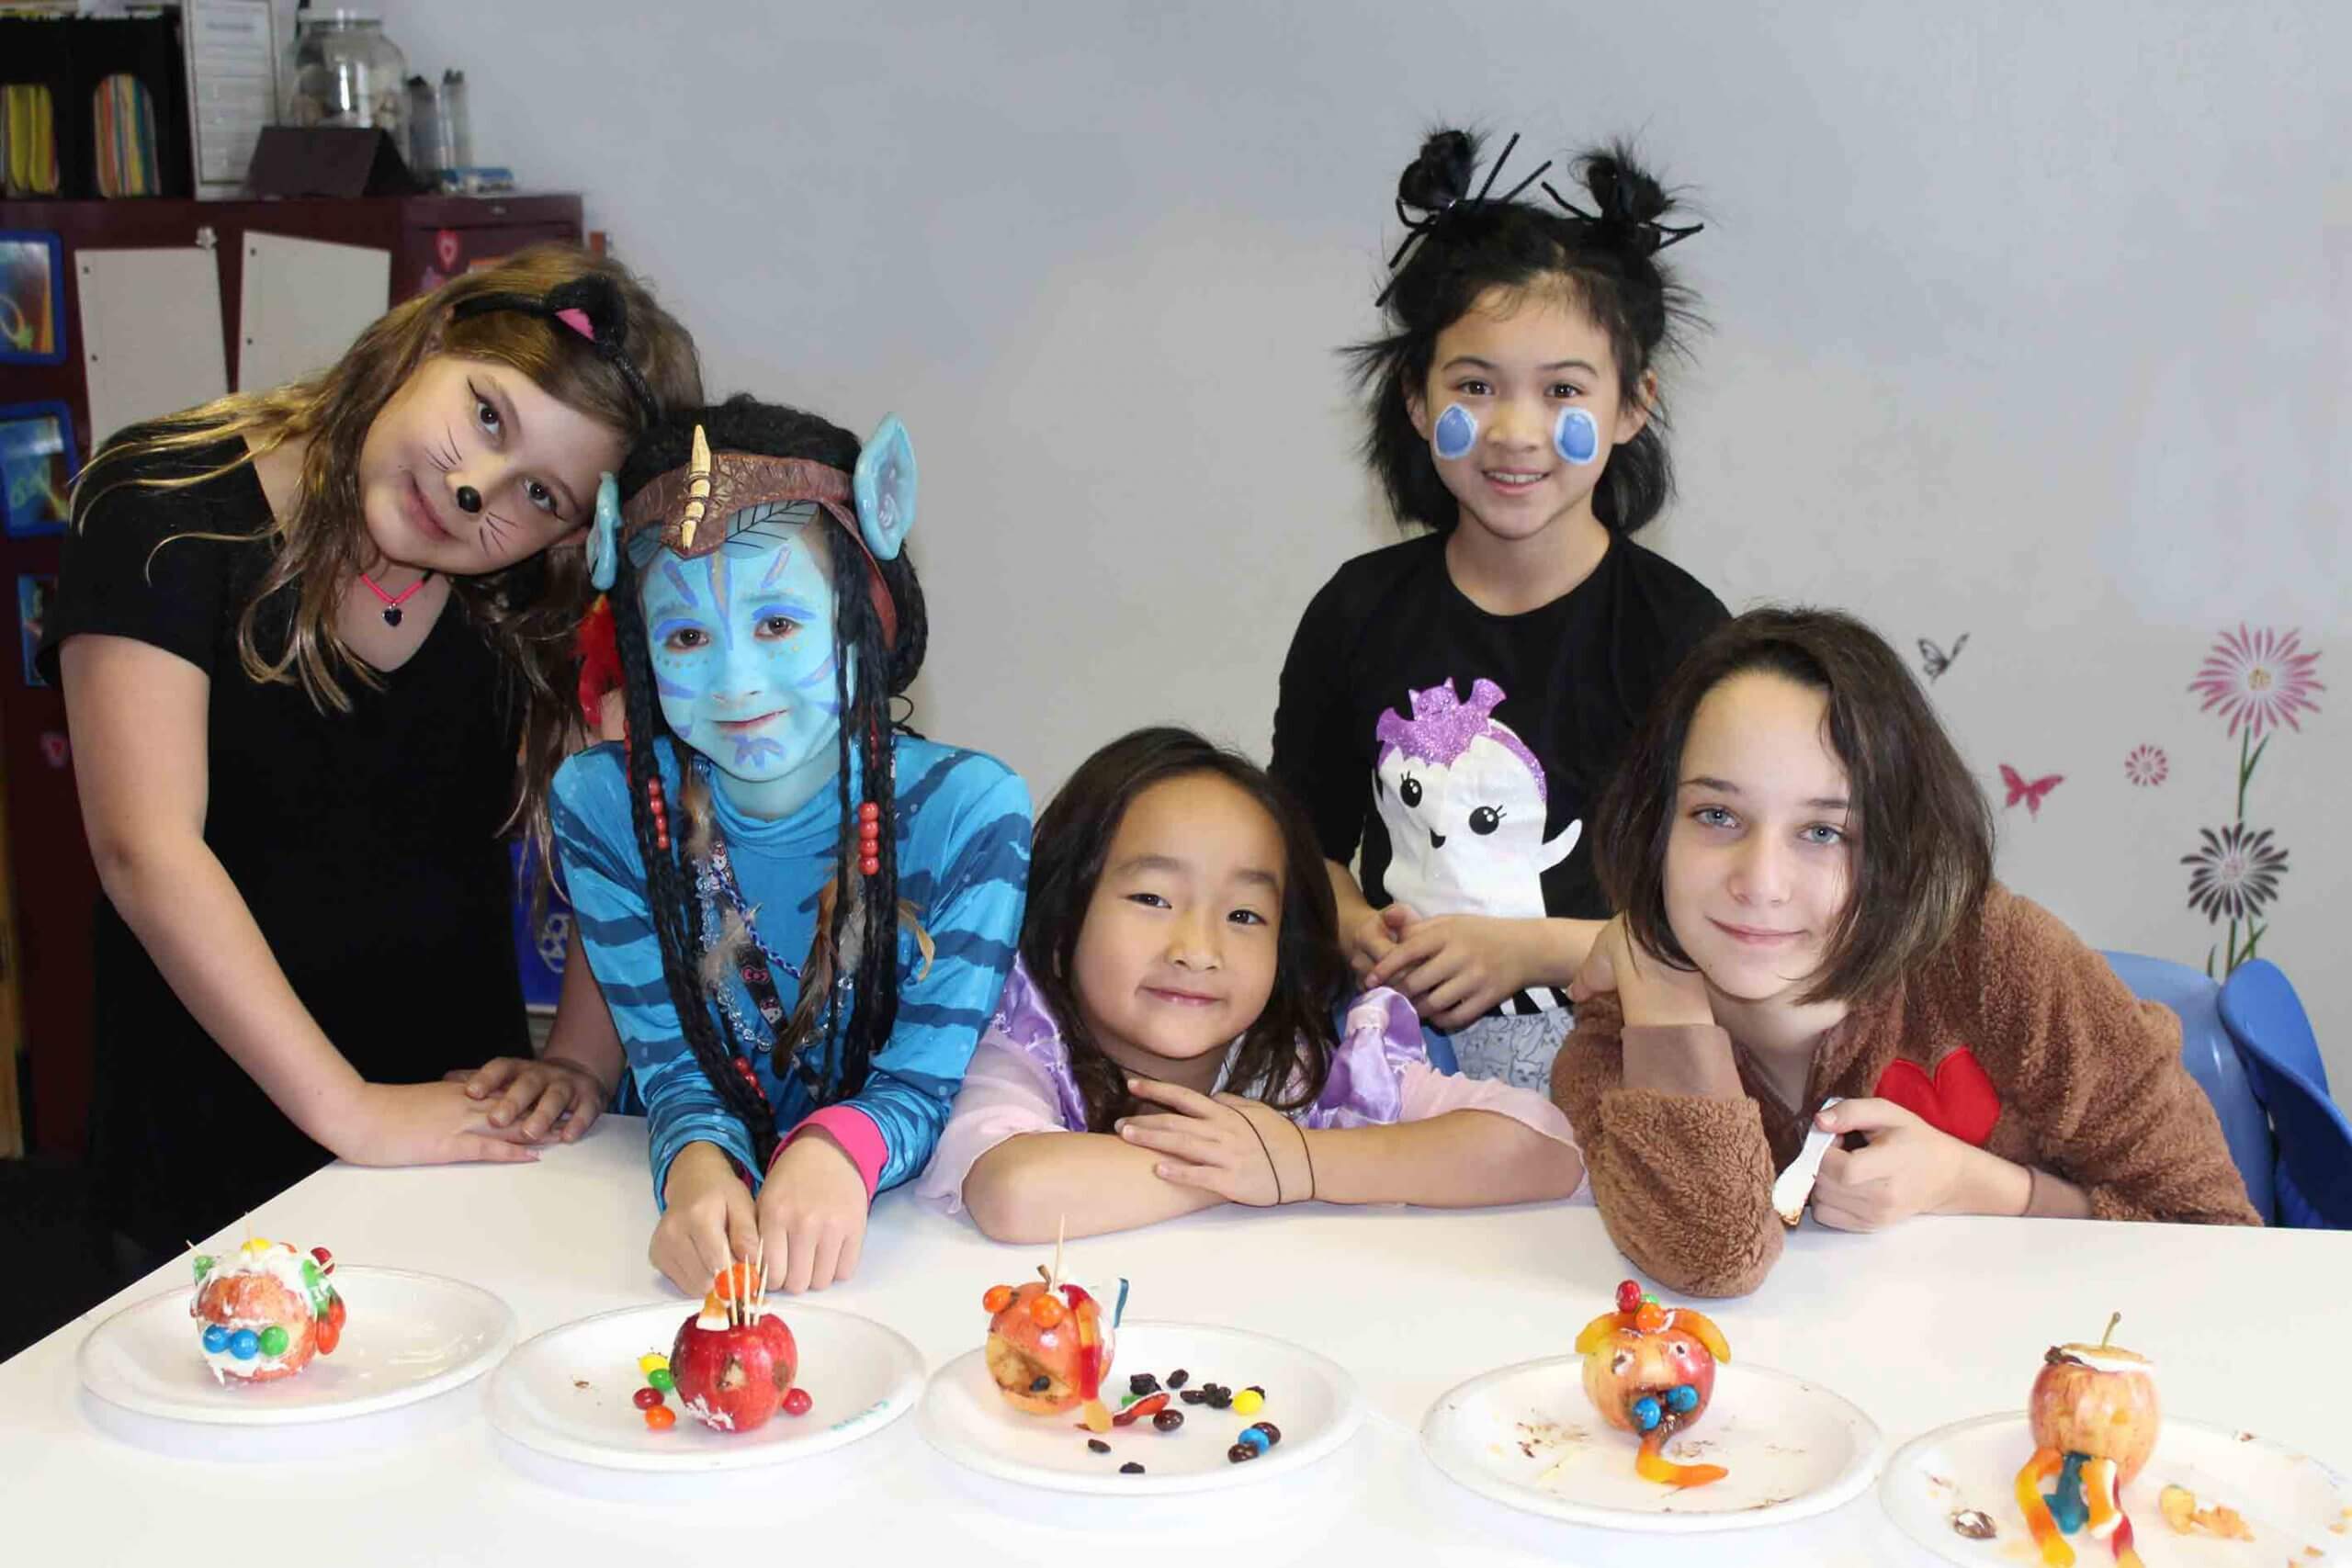 Elementary students posing with their Halloween costume around a table